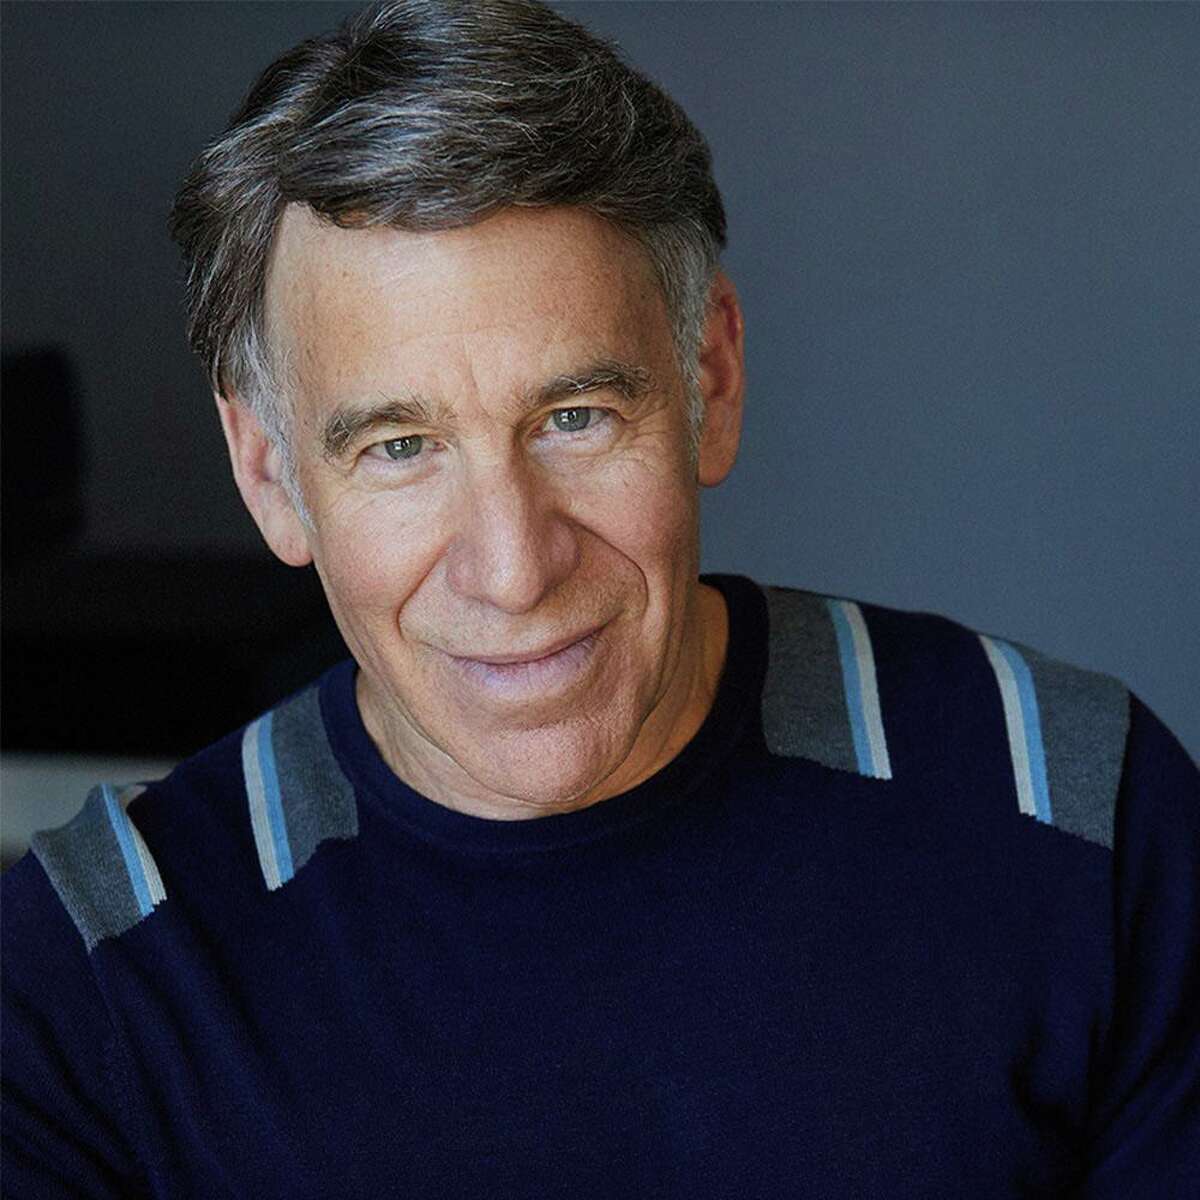 Broadway composer Stephen Schwartz will participate in Toast to Broadway on Nov. 28. Tapping into the wealth of Broadway people who live in the area, Gravitte put together the show for the Playhouse by going into her network of fellow entertainers who are all missing live performances and were happy to share their talents. “I am most looking forward to the fact that people in our area will get to experience a little of what we are all missing, which is the lights of Broadway and all these incredible performers who really don’t have an outlet except for this right now and you get to stay in your jammies and watch them.” The performers each taped one song in their home studio or outdoors. “Every performer in this day and age has learned to create their own little recording studio at home, we all have lights and a microphone. … That’s why the show uniformly doesn’t all look the same way but I also think it makes it look more interesting,” she said.